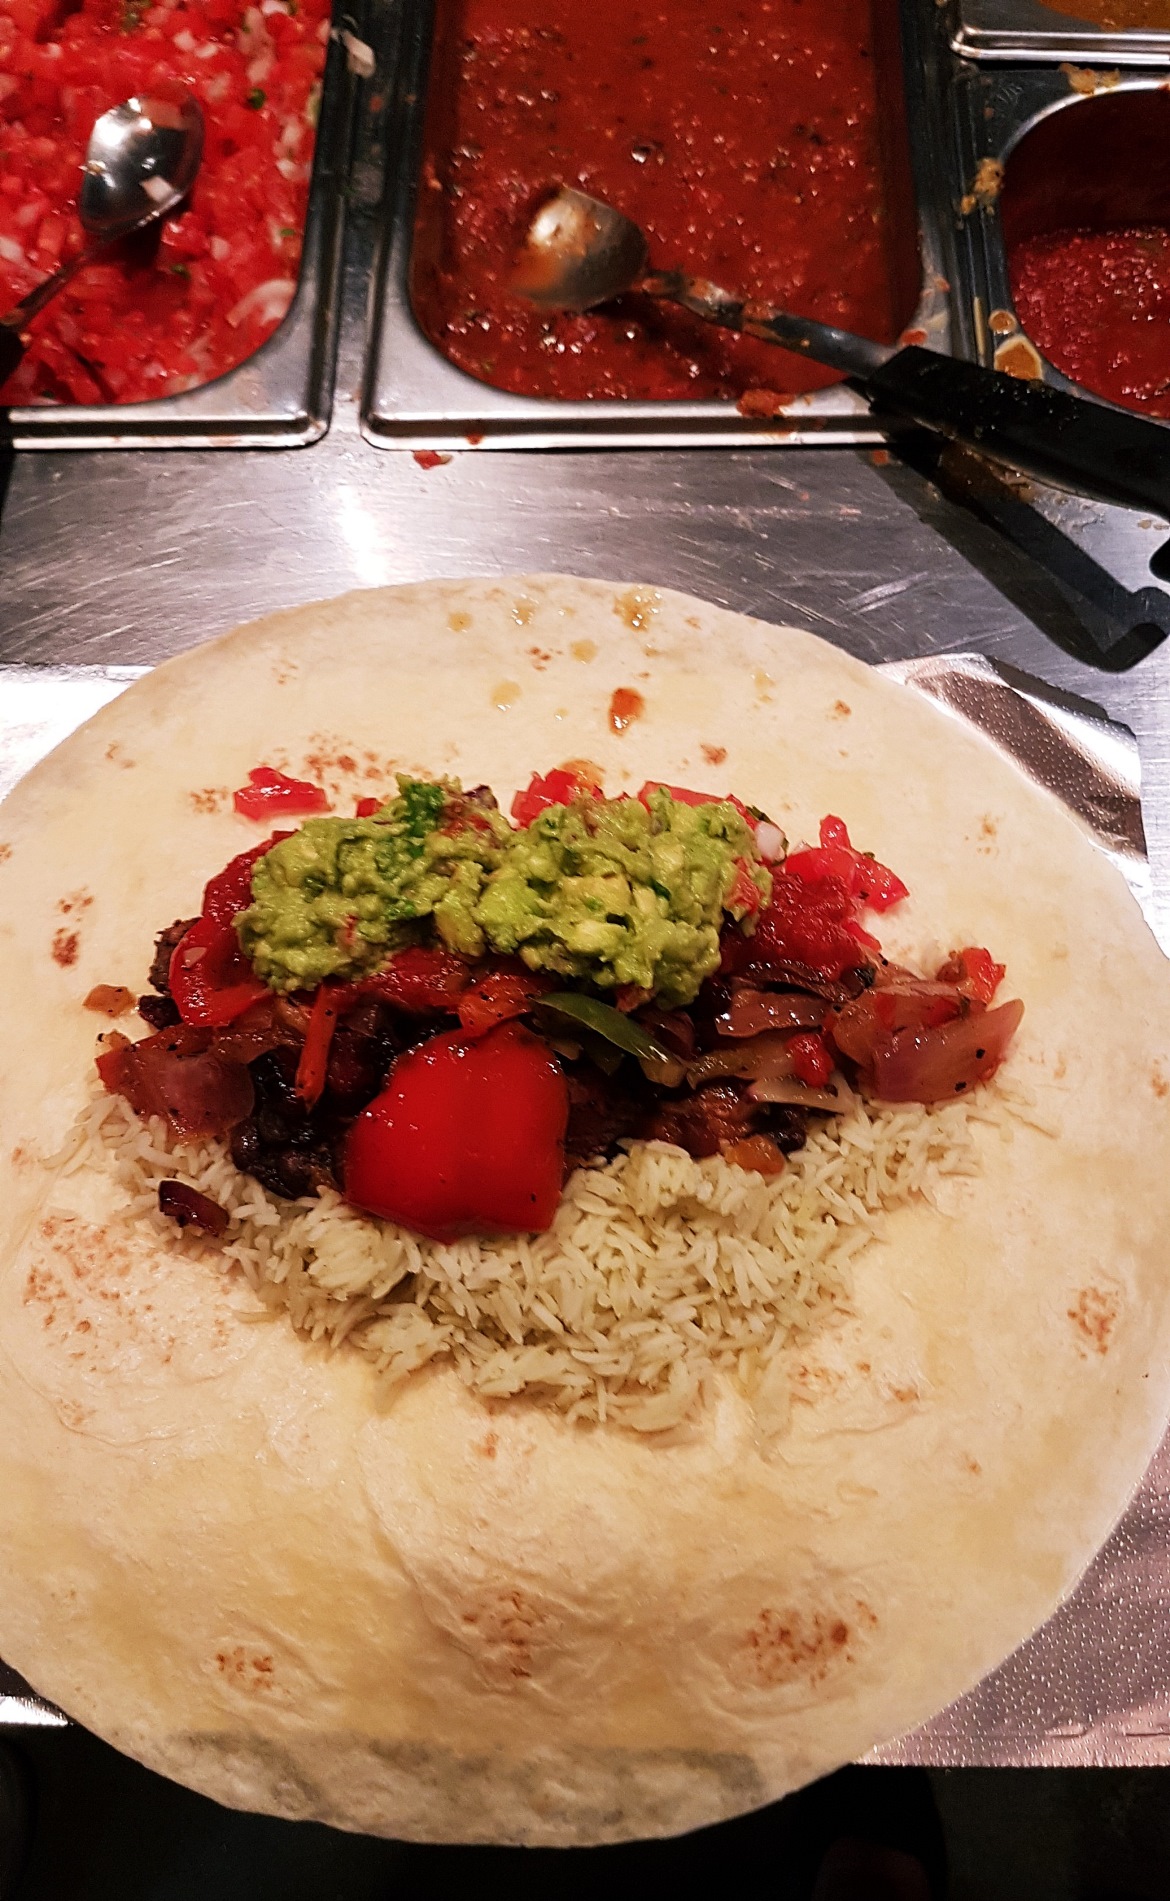 A fully loaded burrito - Burrito Masterclass with Barburrito, review by BeckyBecky Blogs